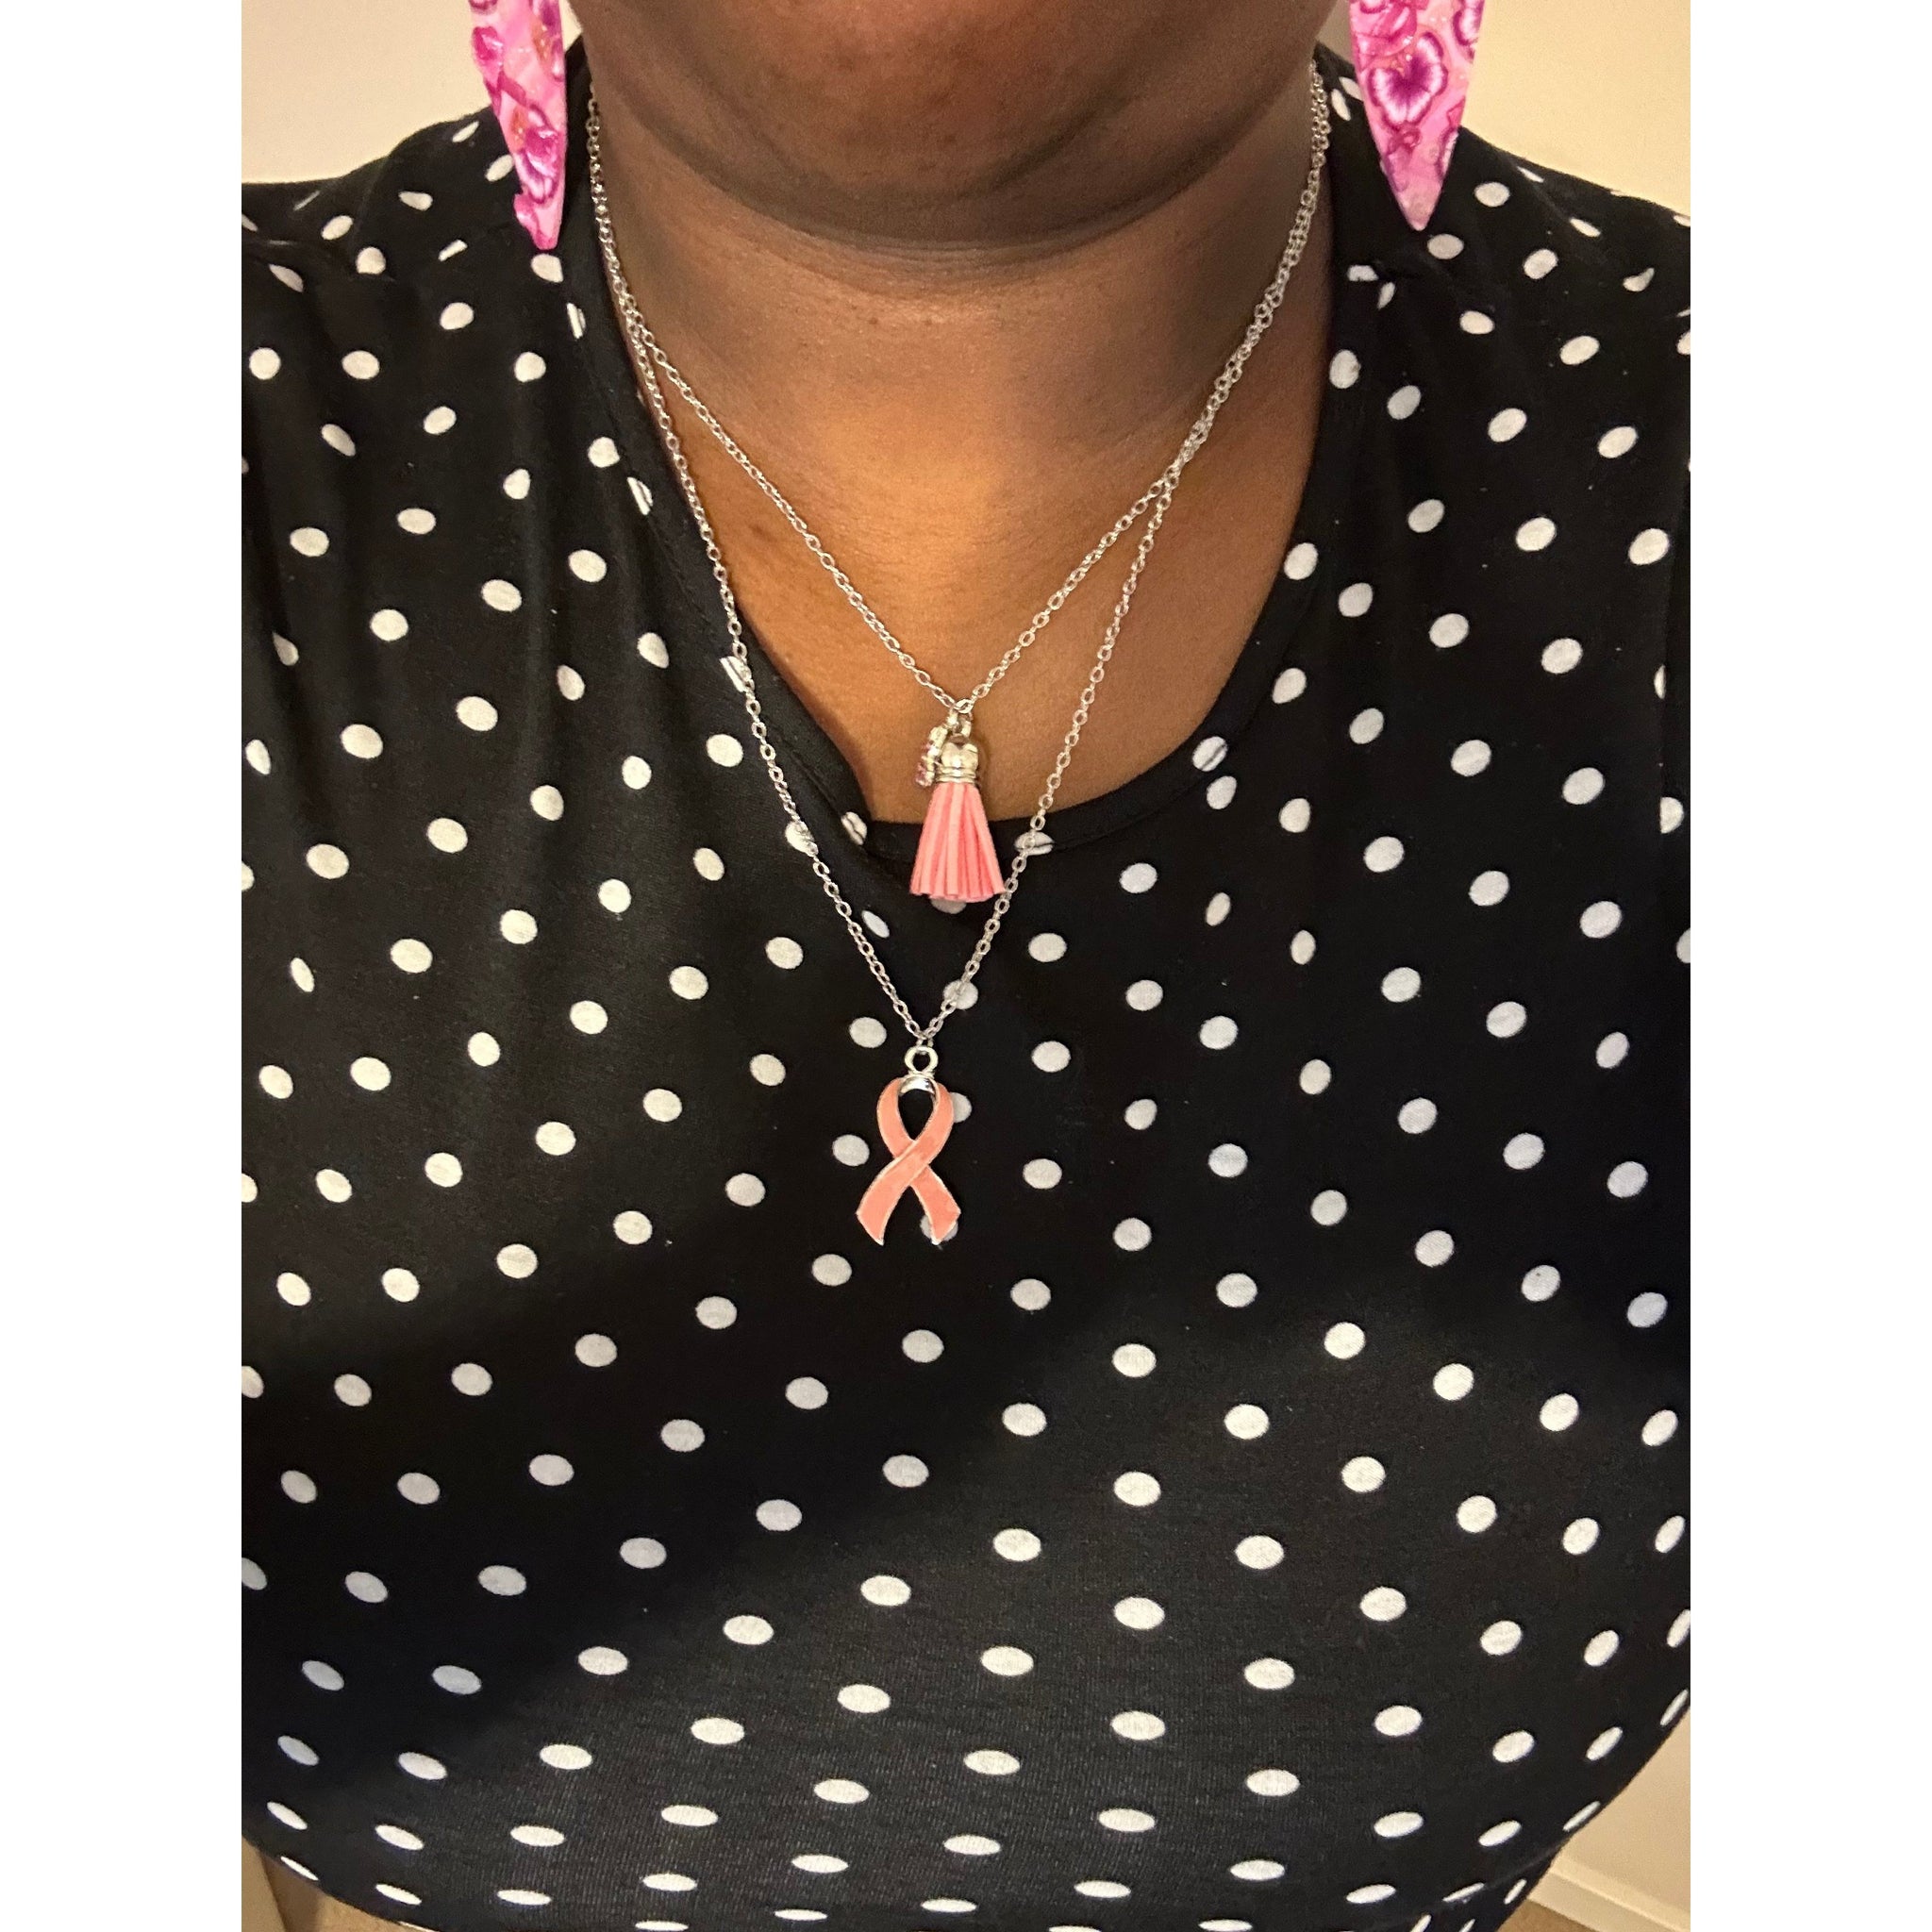 Breast cancer awareness Necklace